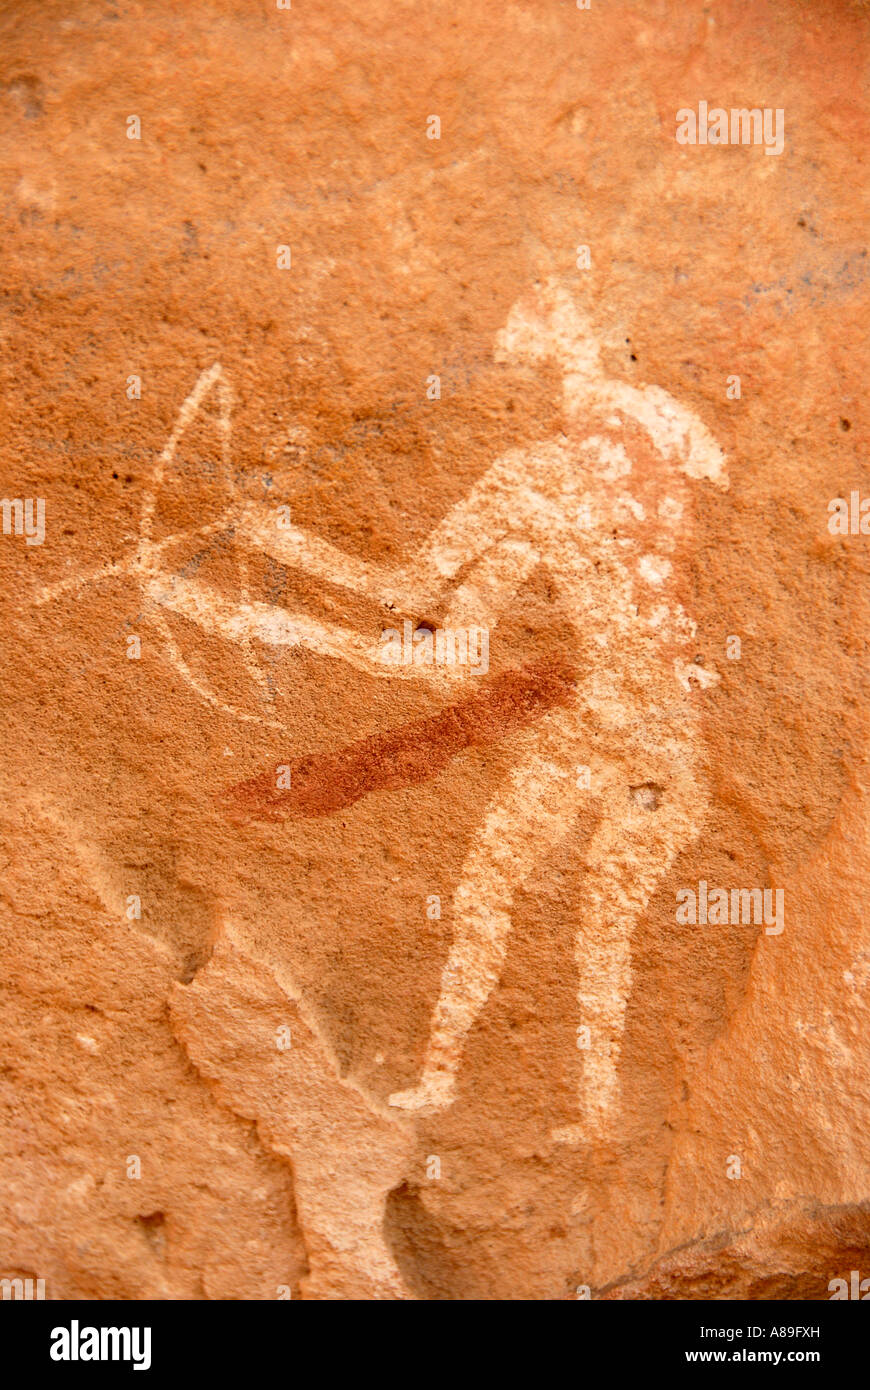 Neolithic rock drawing of a hunting man with weapons bow and arrow Acacus Libya Stock Photo